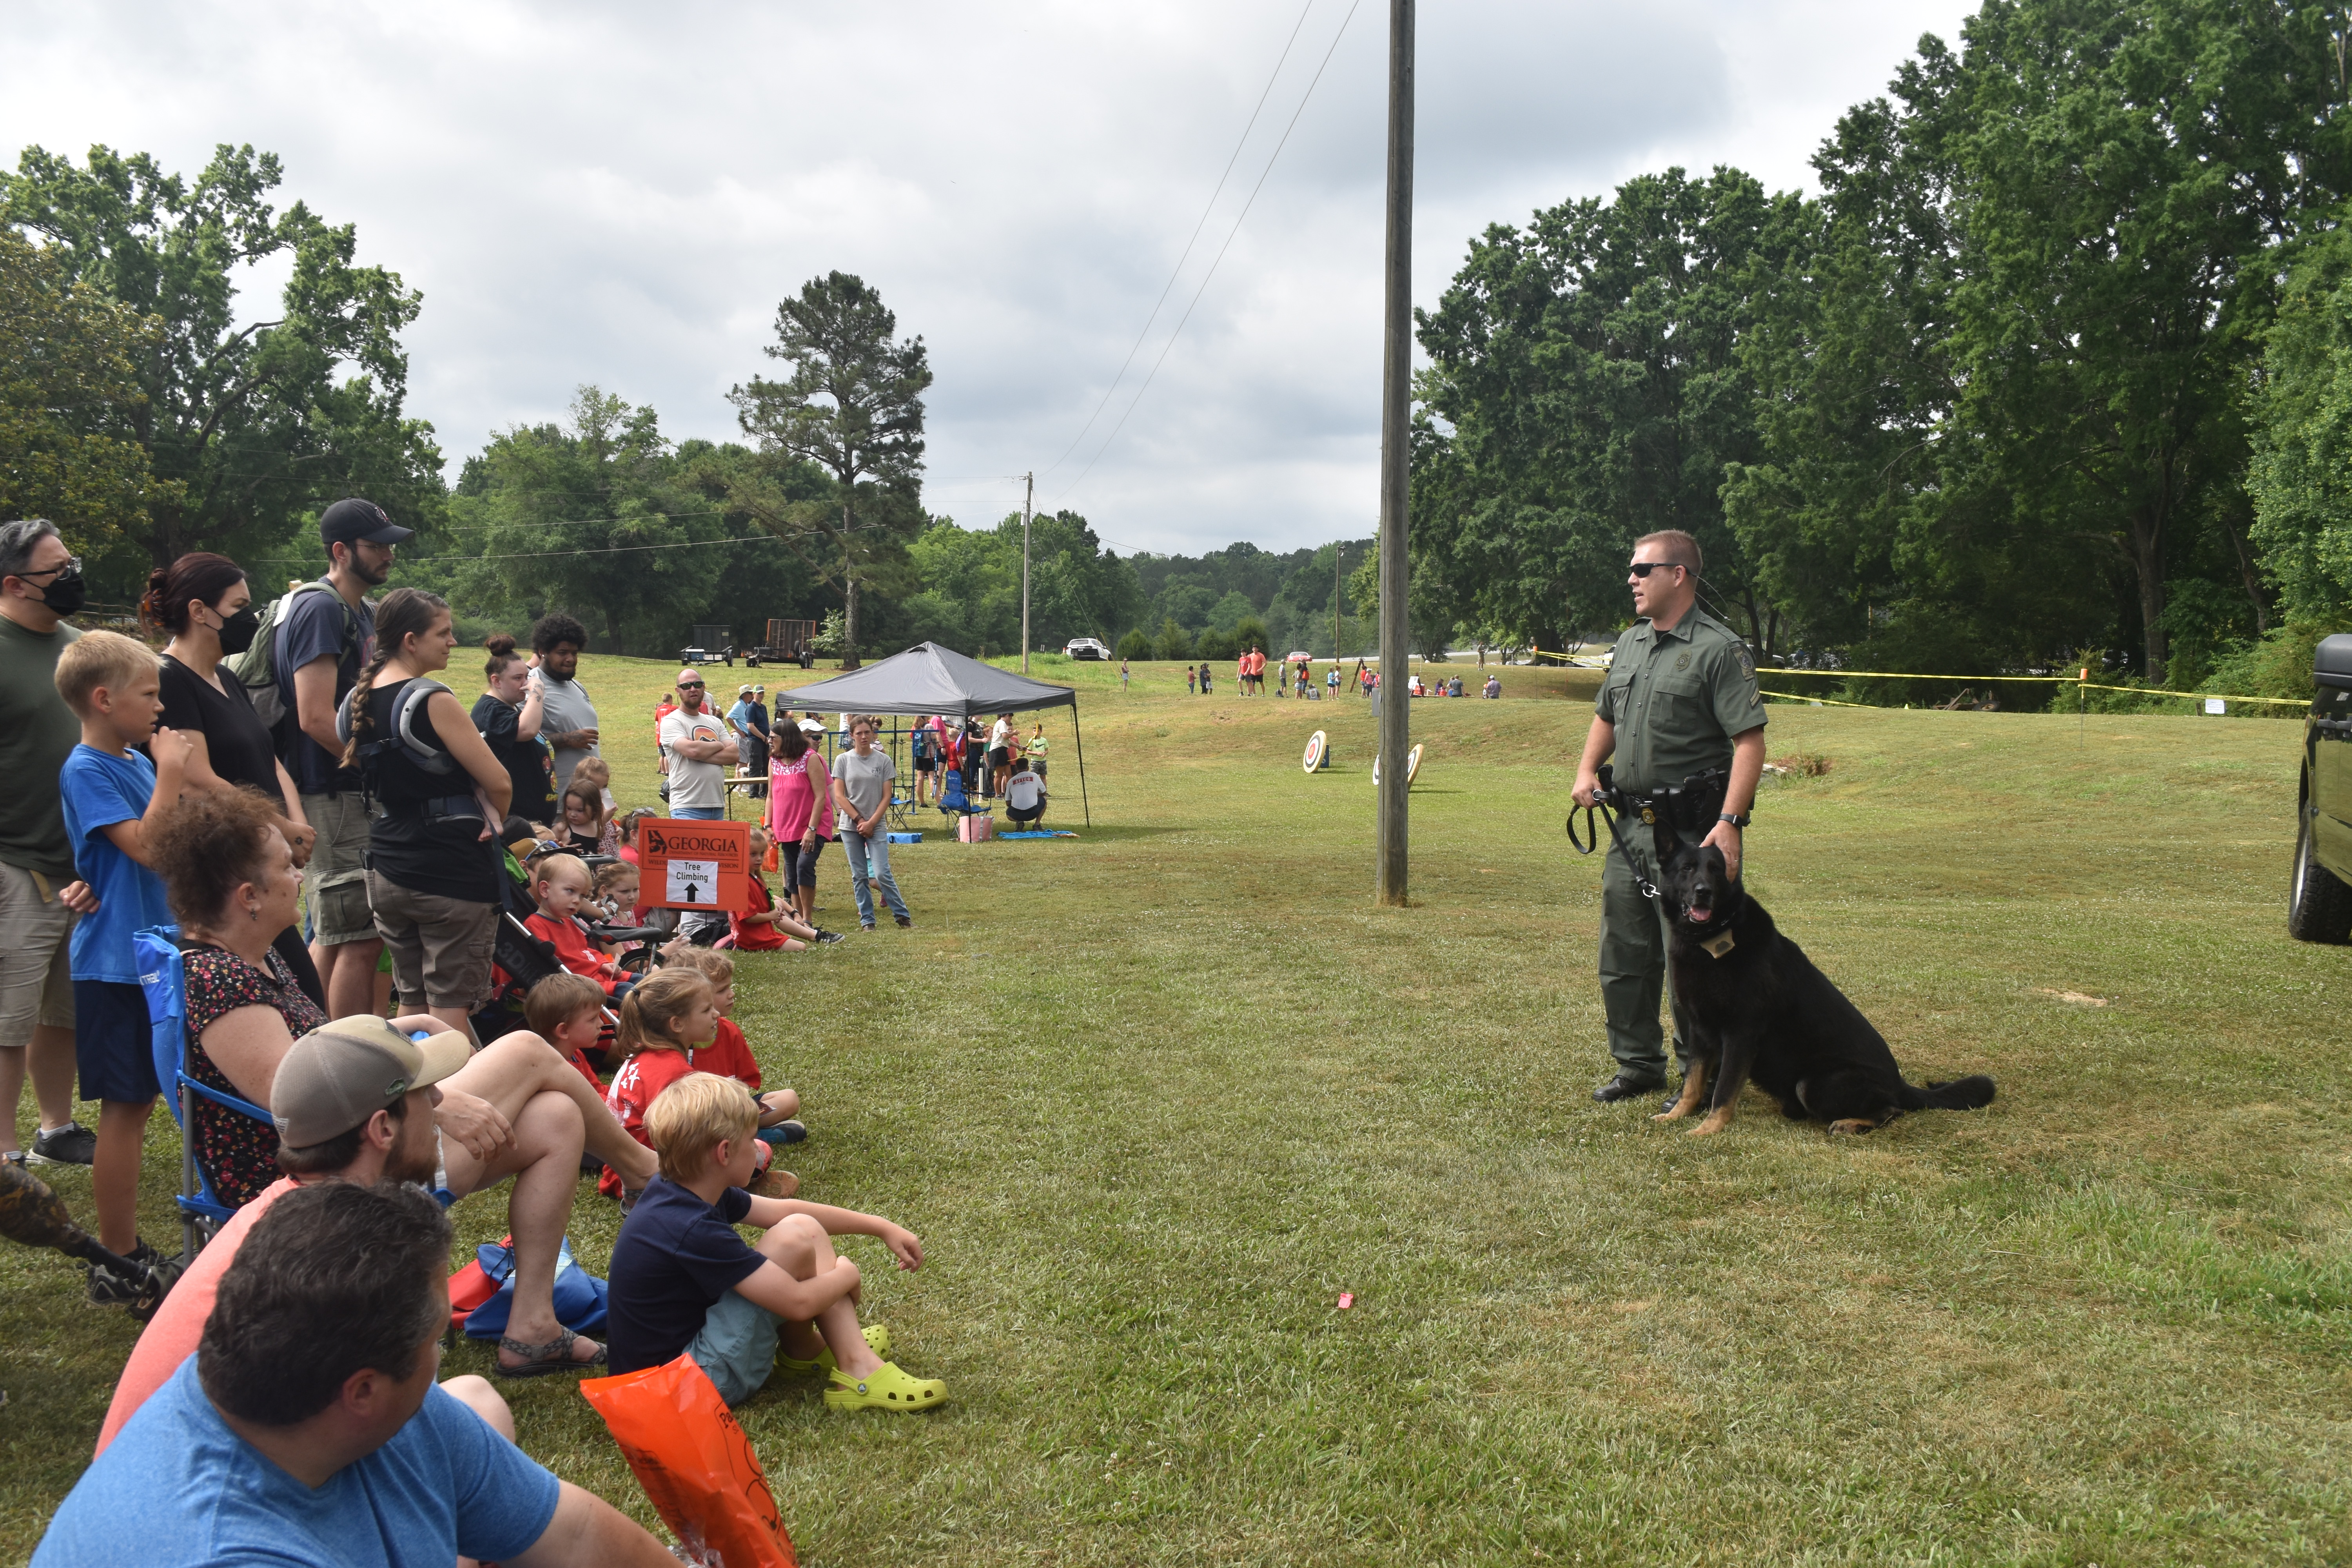 Children and parents gather around a field to watch K9-police unit demonstration